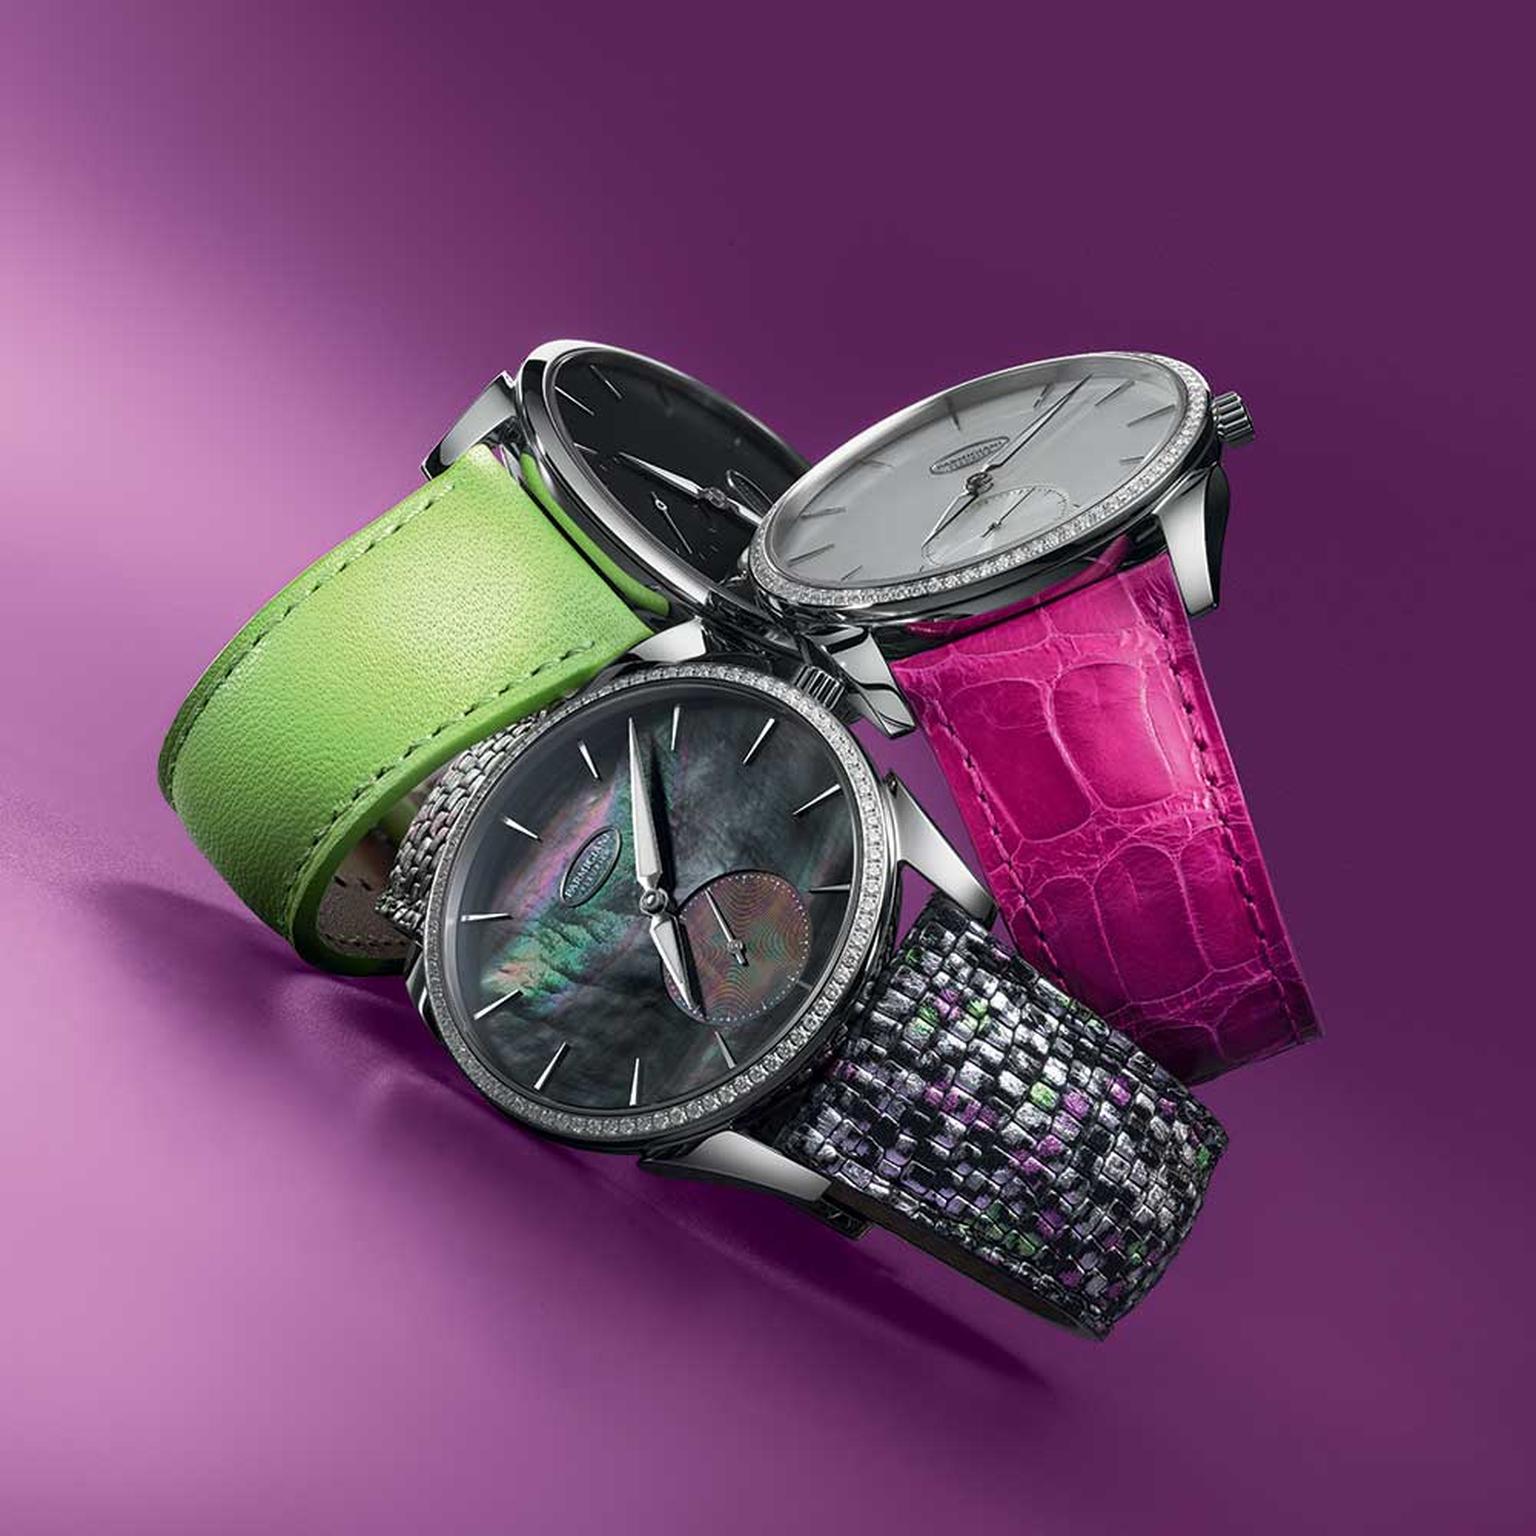 Sizzling hot Parmigiani watches | The 